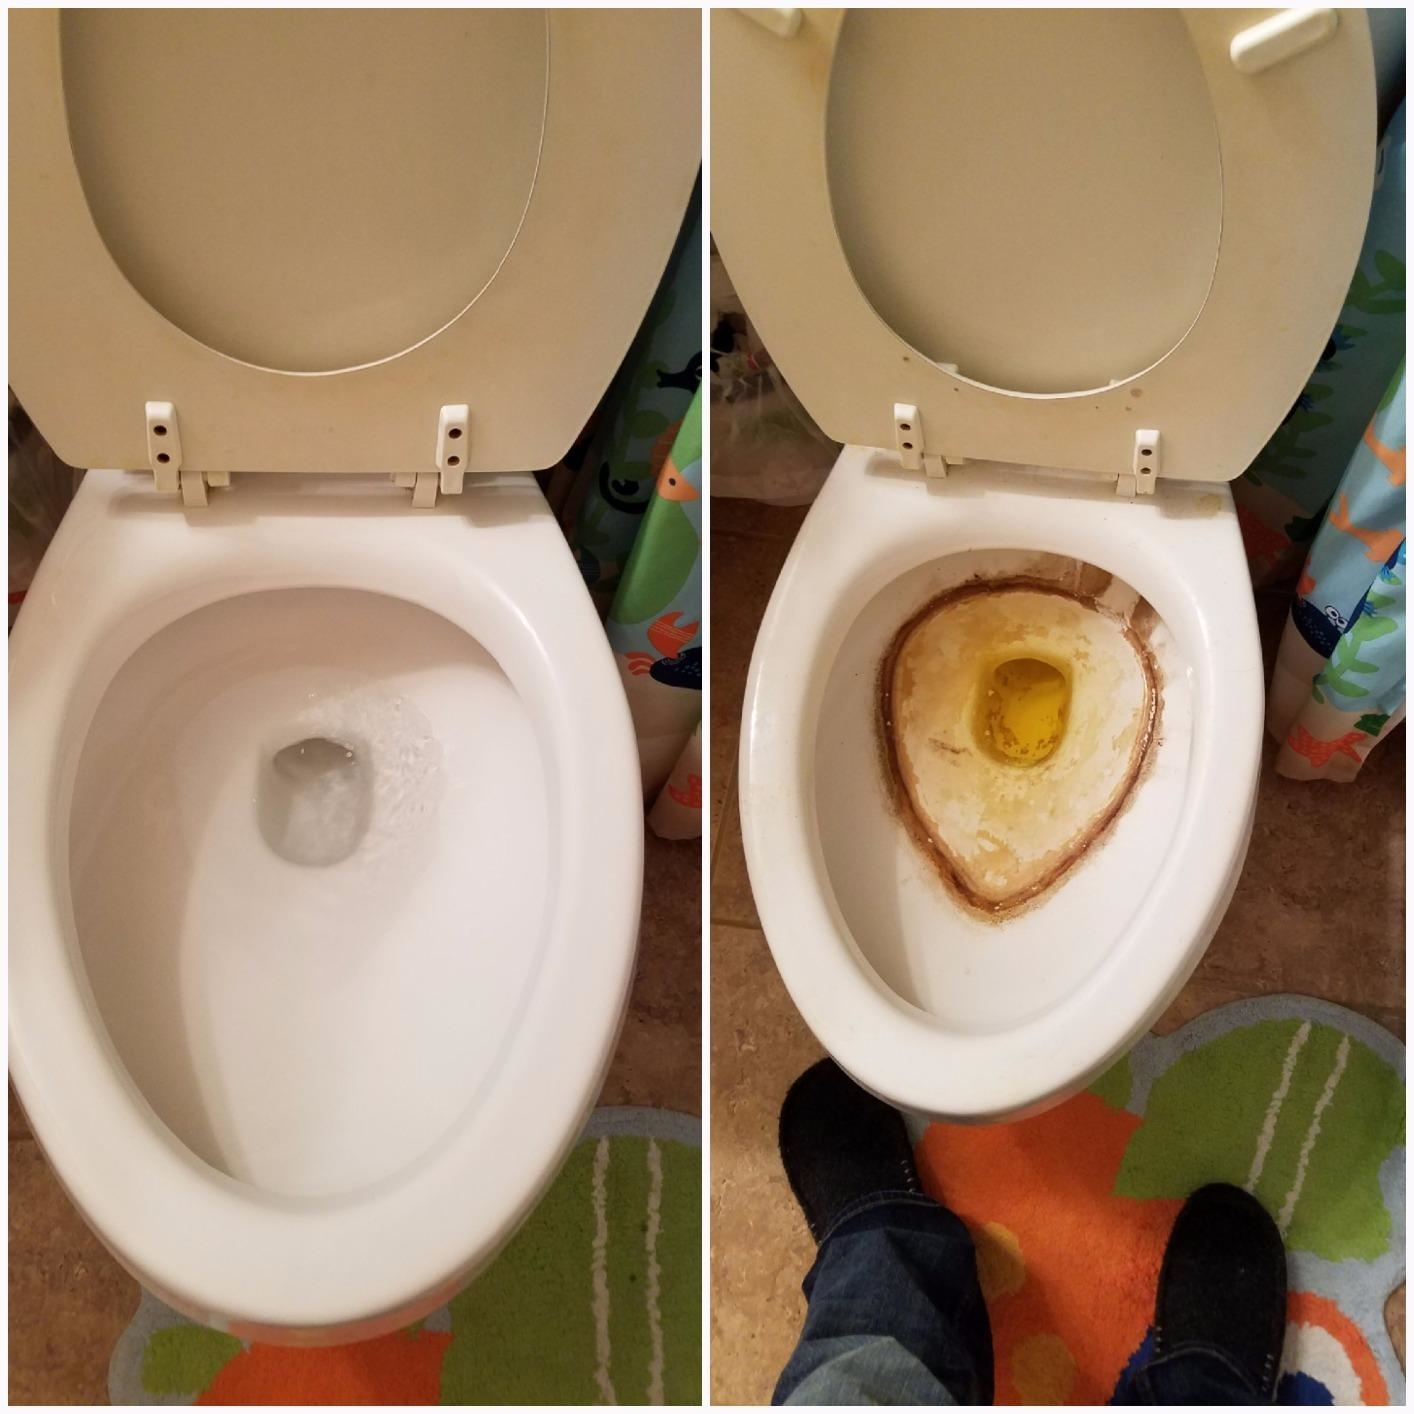 after: a sparkling clean toilet before: a toilet with a huge, dark rust stain on it where the water sat